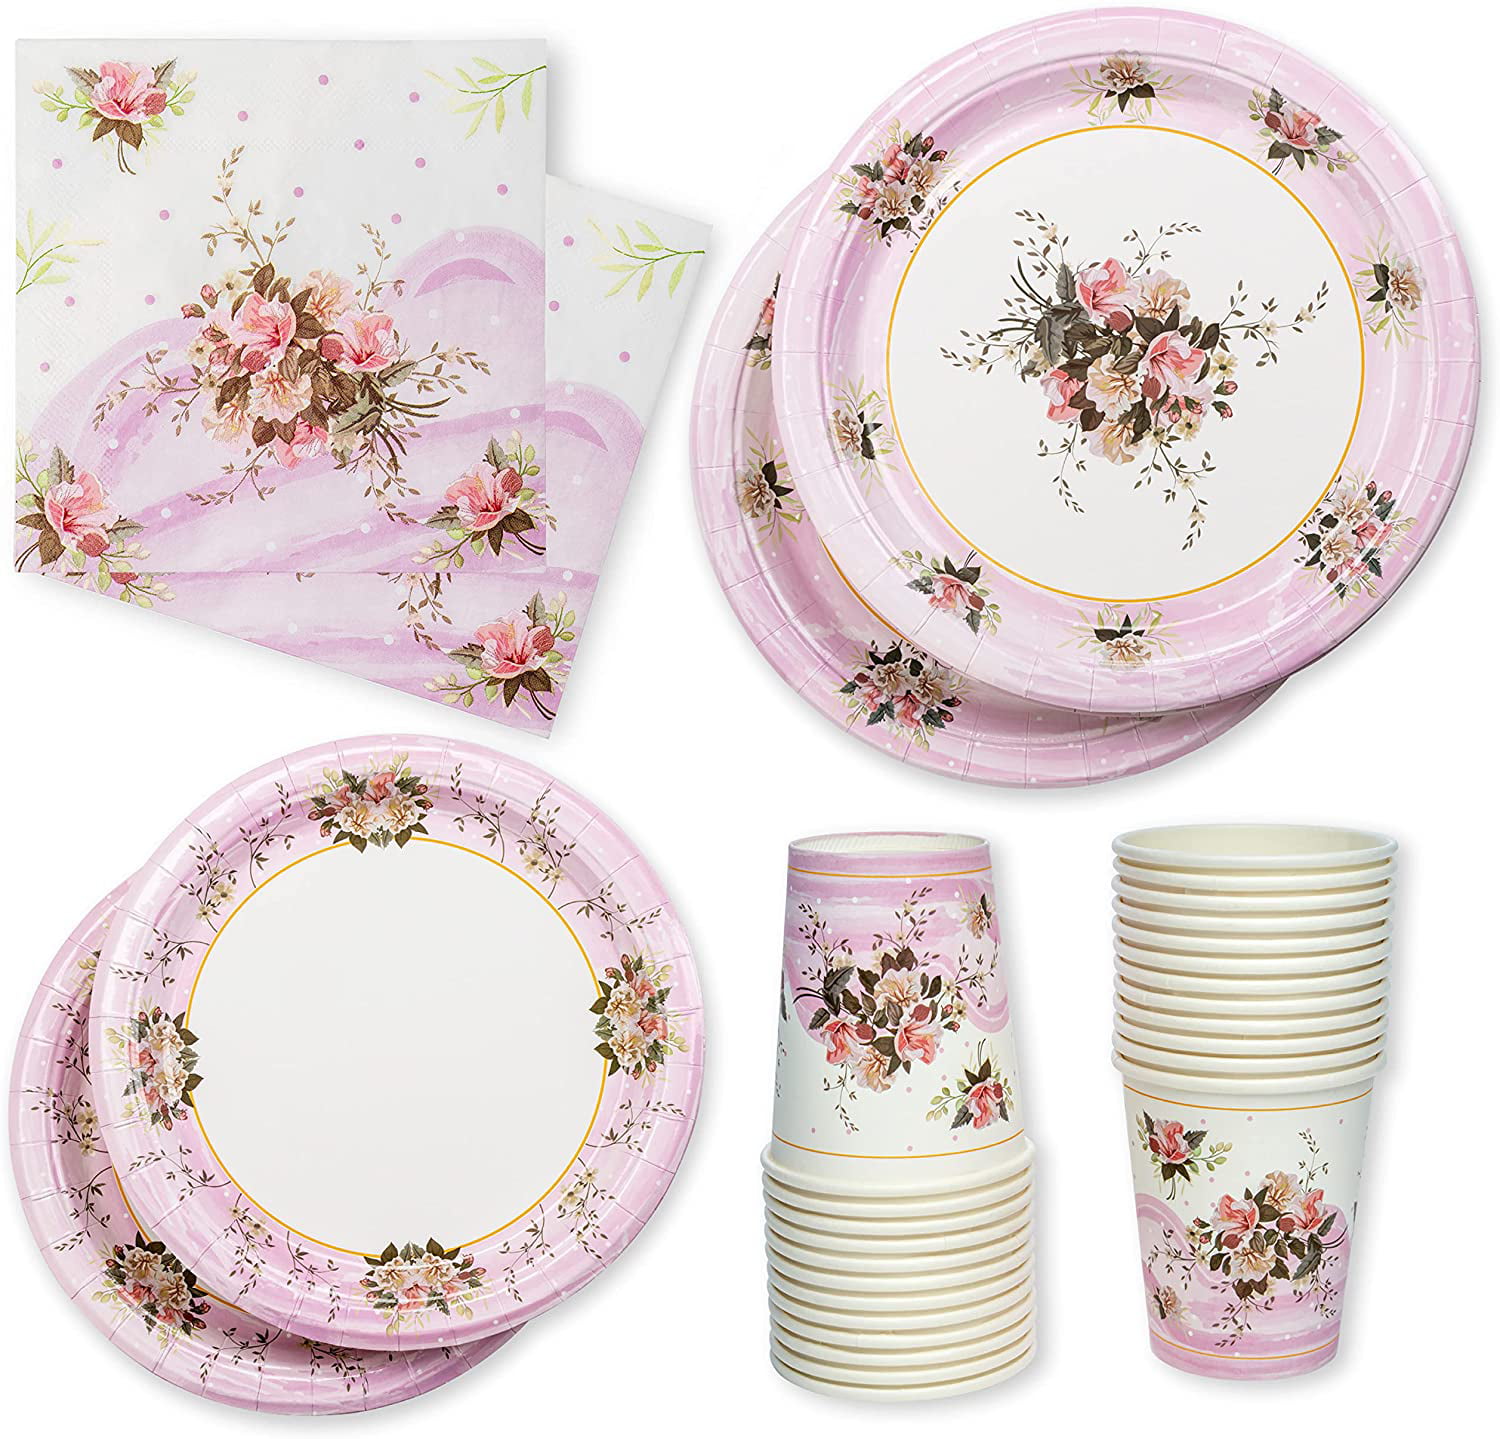 Details about   Pink Floral Party Supplies Napkins Paper Plates Cups And Plastic Cutlery 24, 